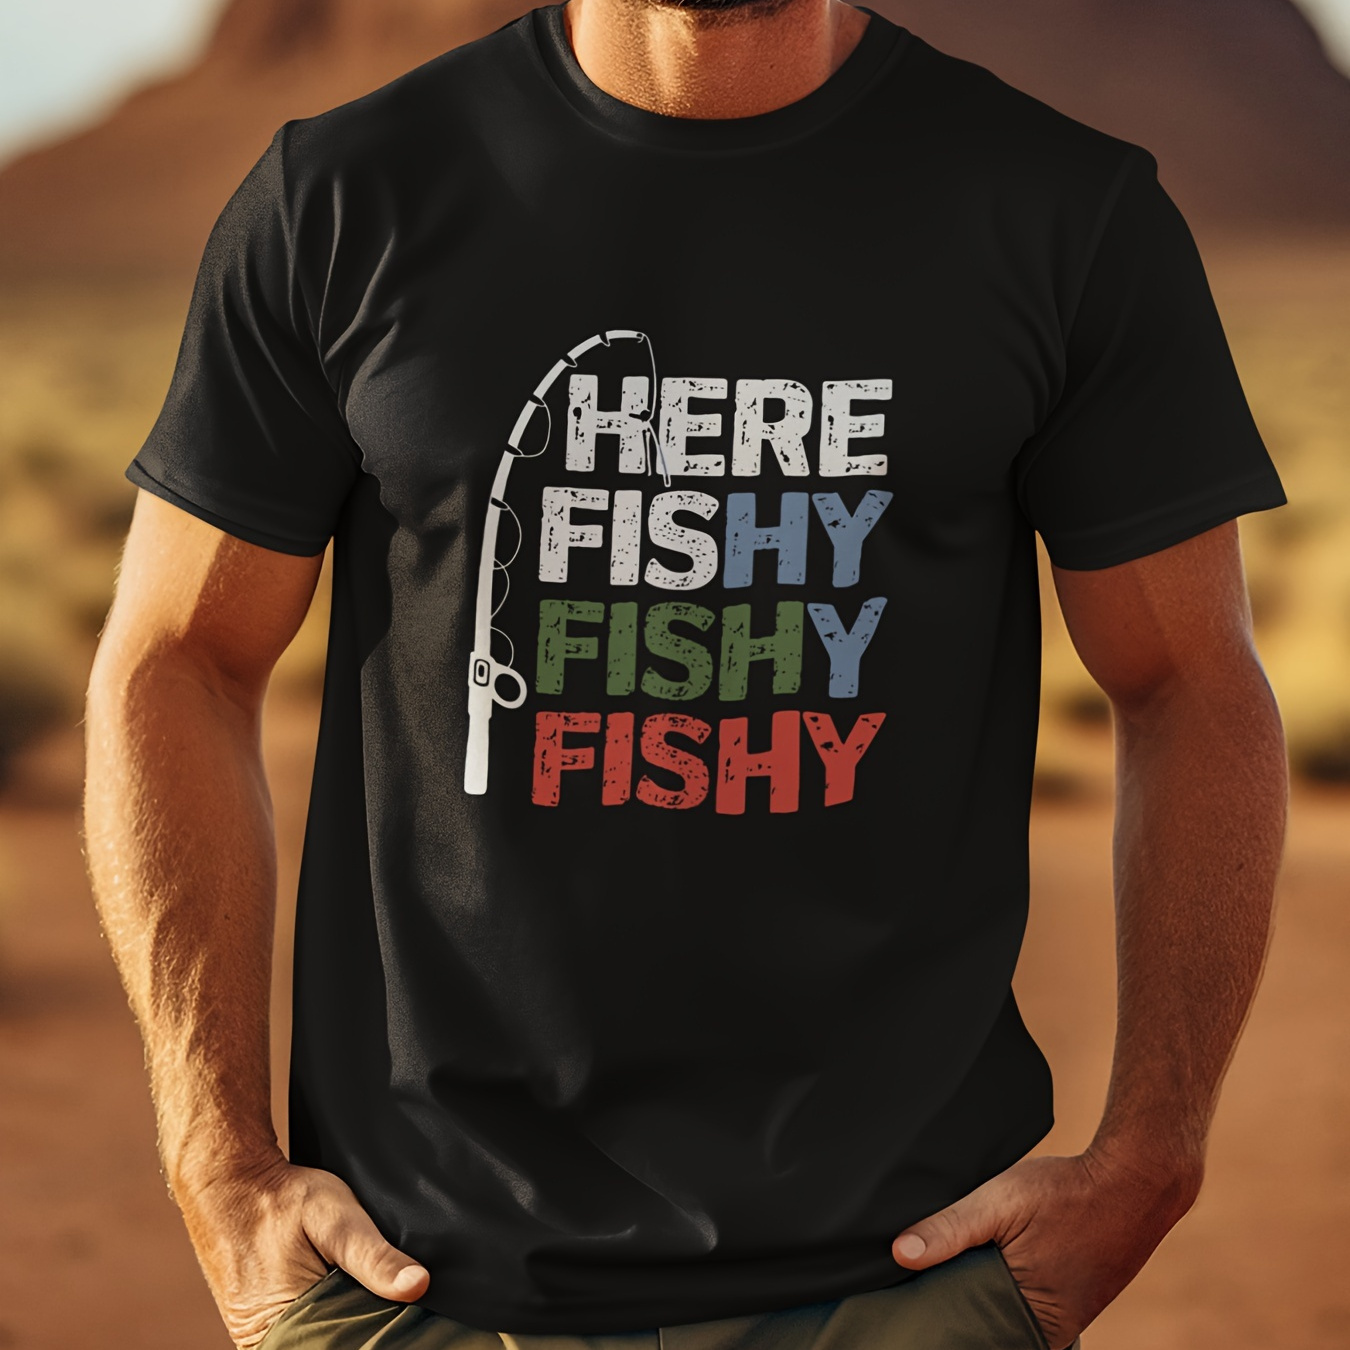 

Fishy Print - Men's Round Neck Short Sleeve Tee - Fashion Regular Fit T-shirt - Tops For Spring, Summer& Autumn Holiday